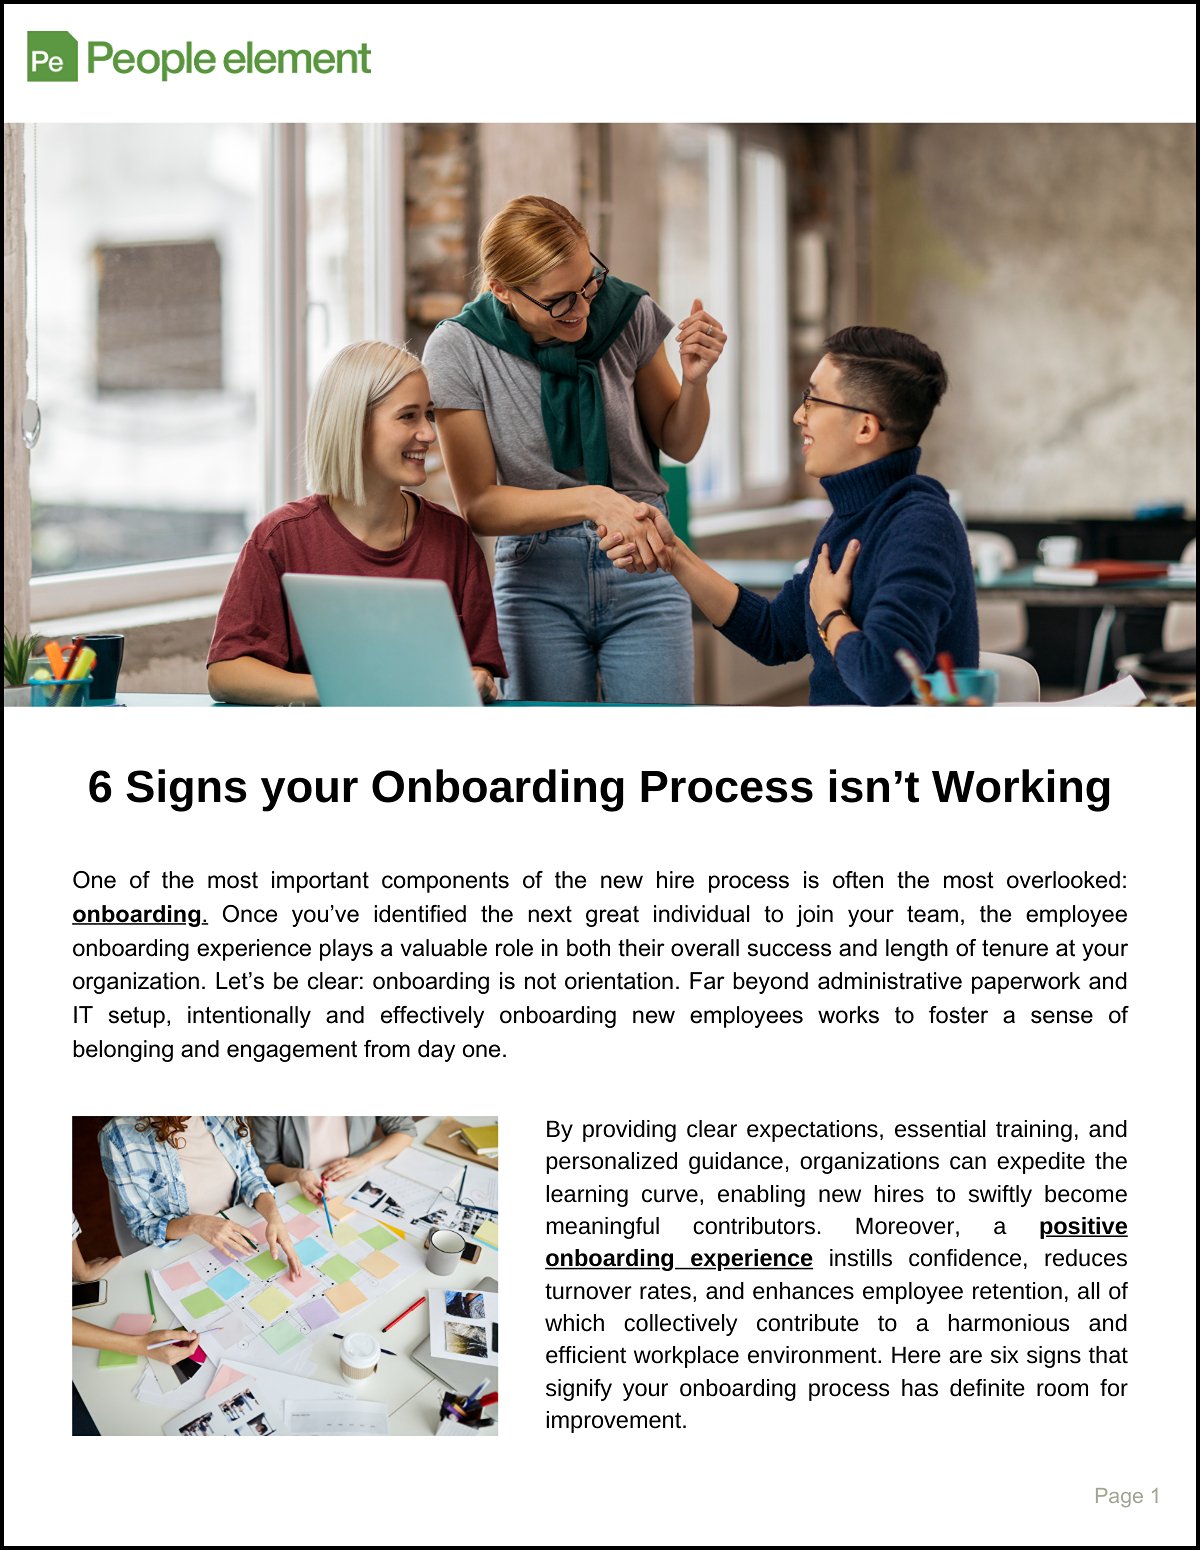 6 Signs Your Onboarding Process Isn't Working